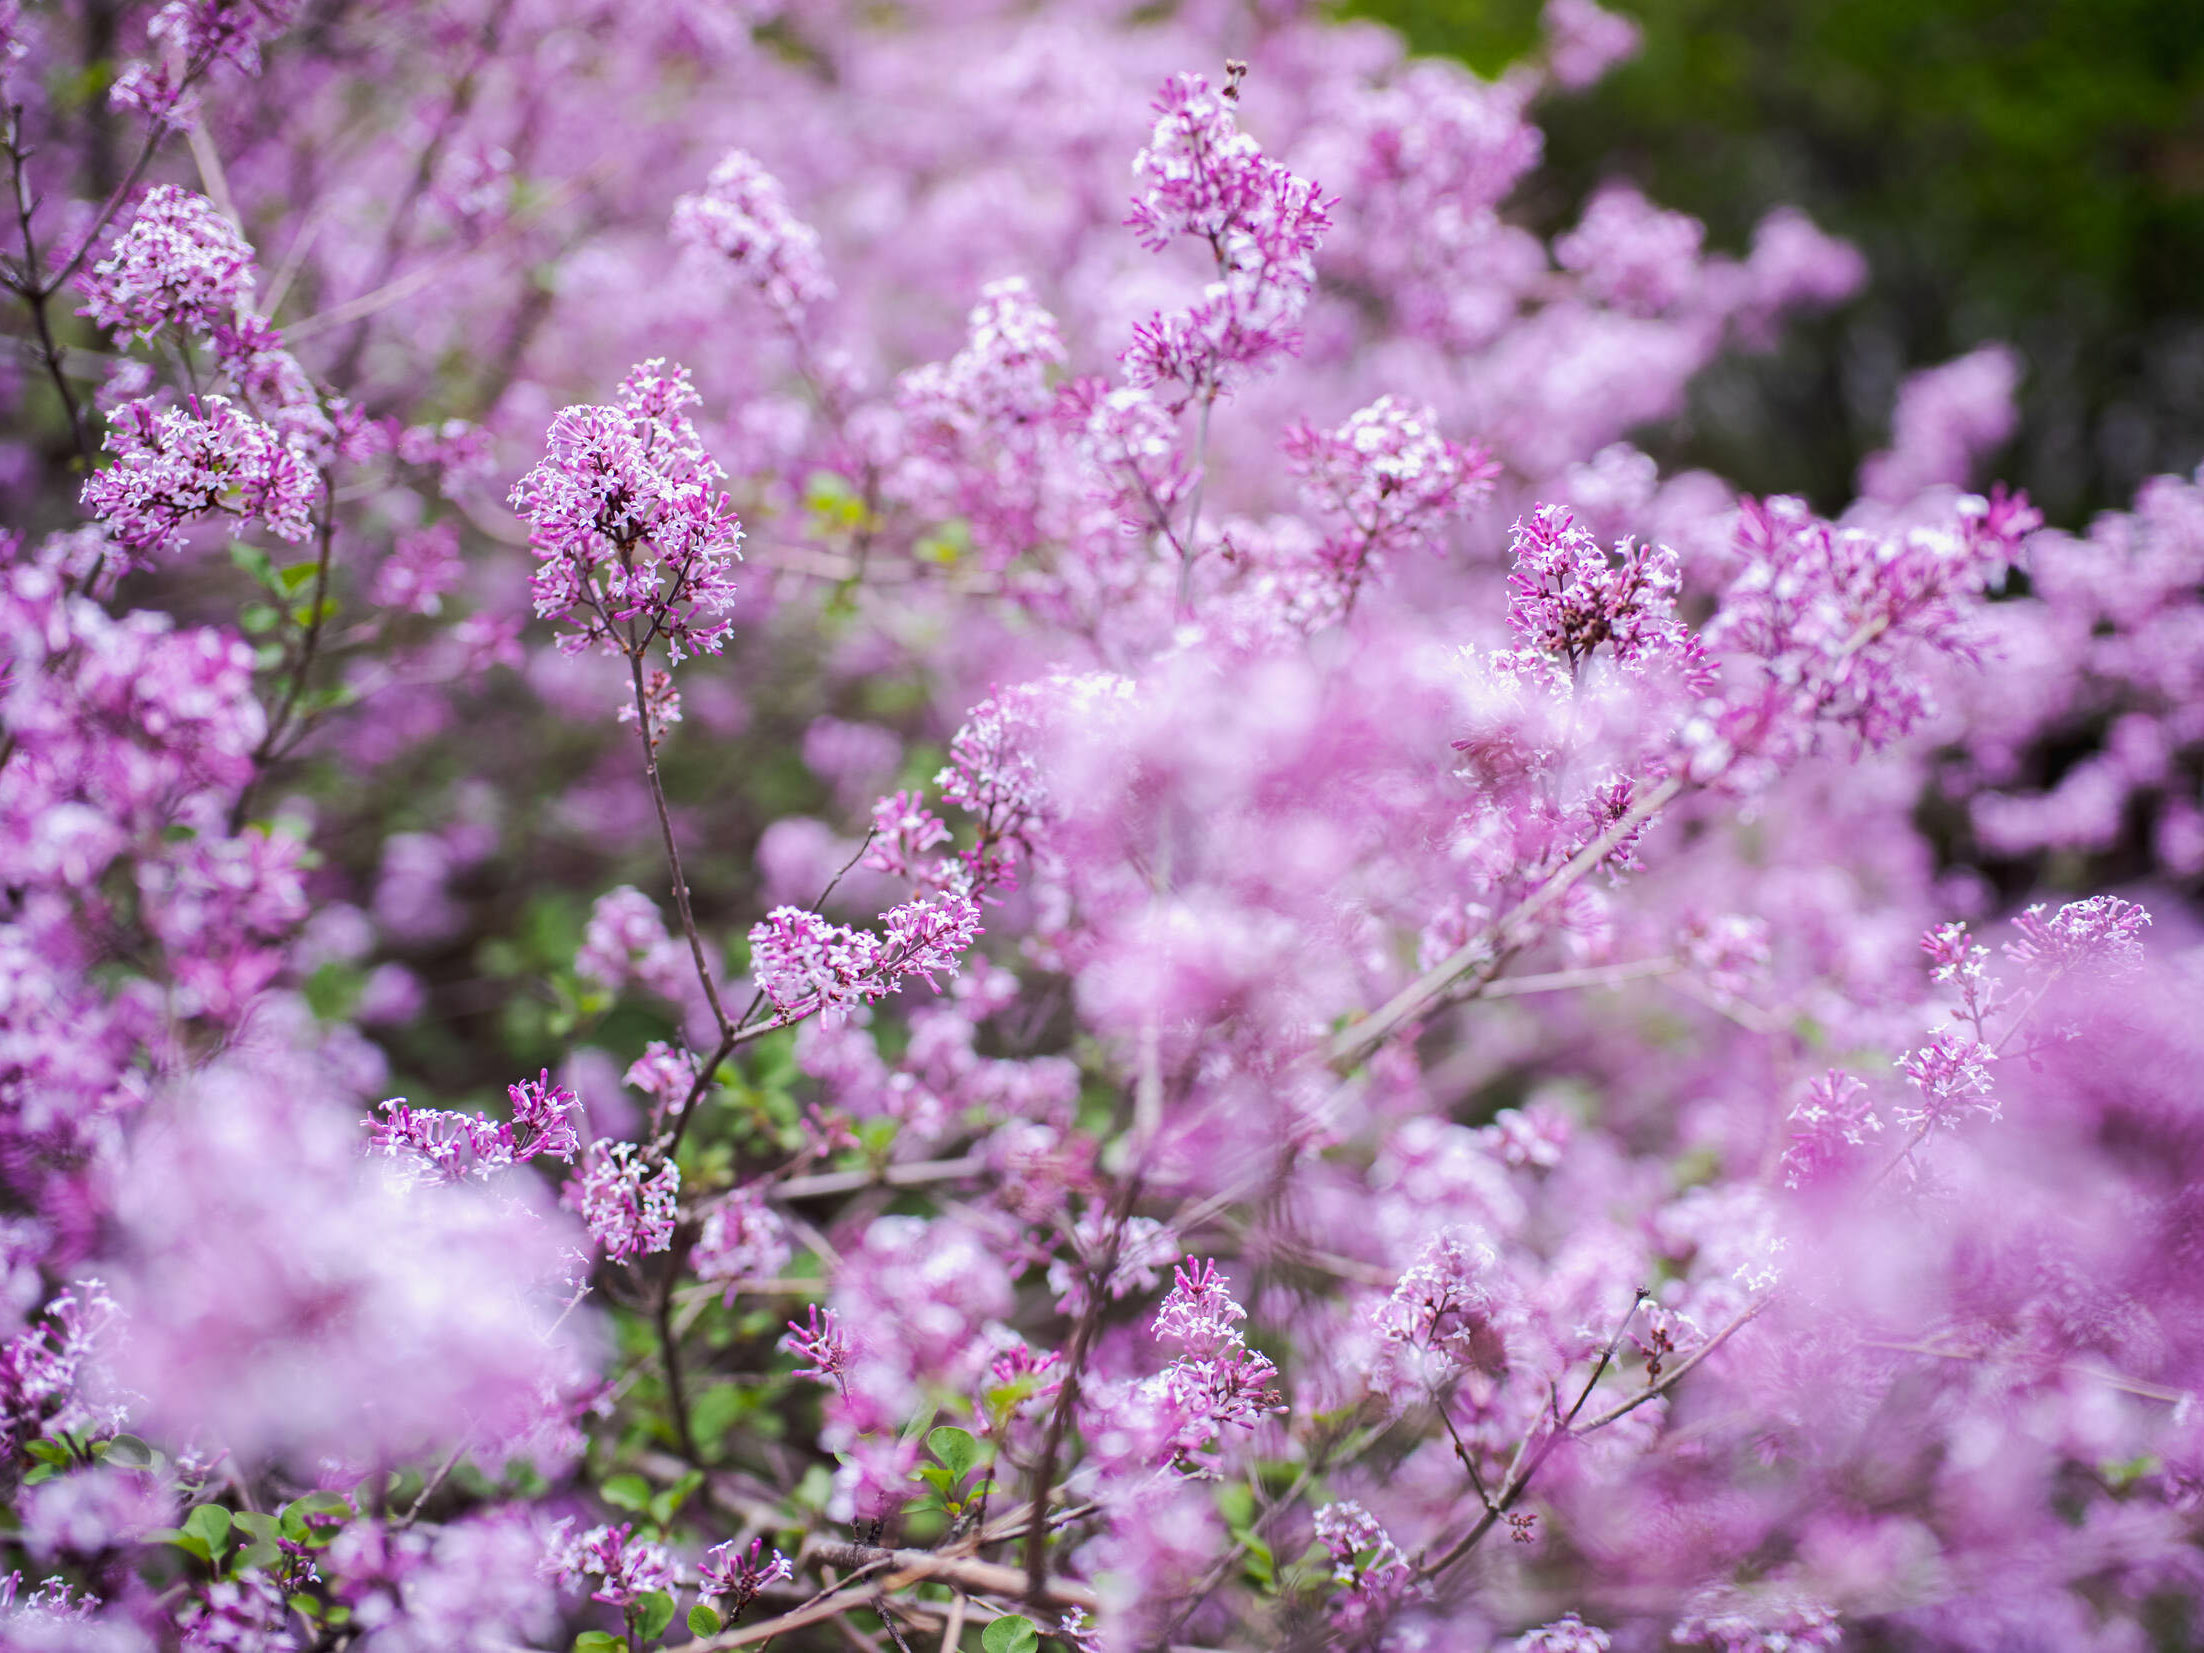 Bright pink and purple flowers in bloom